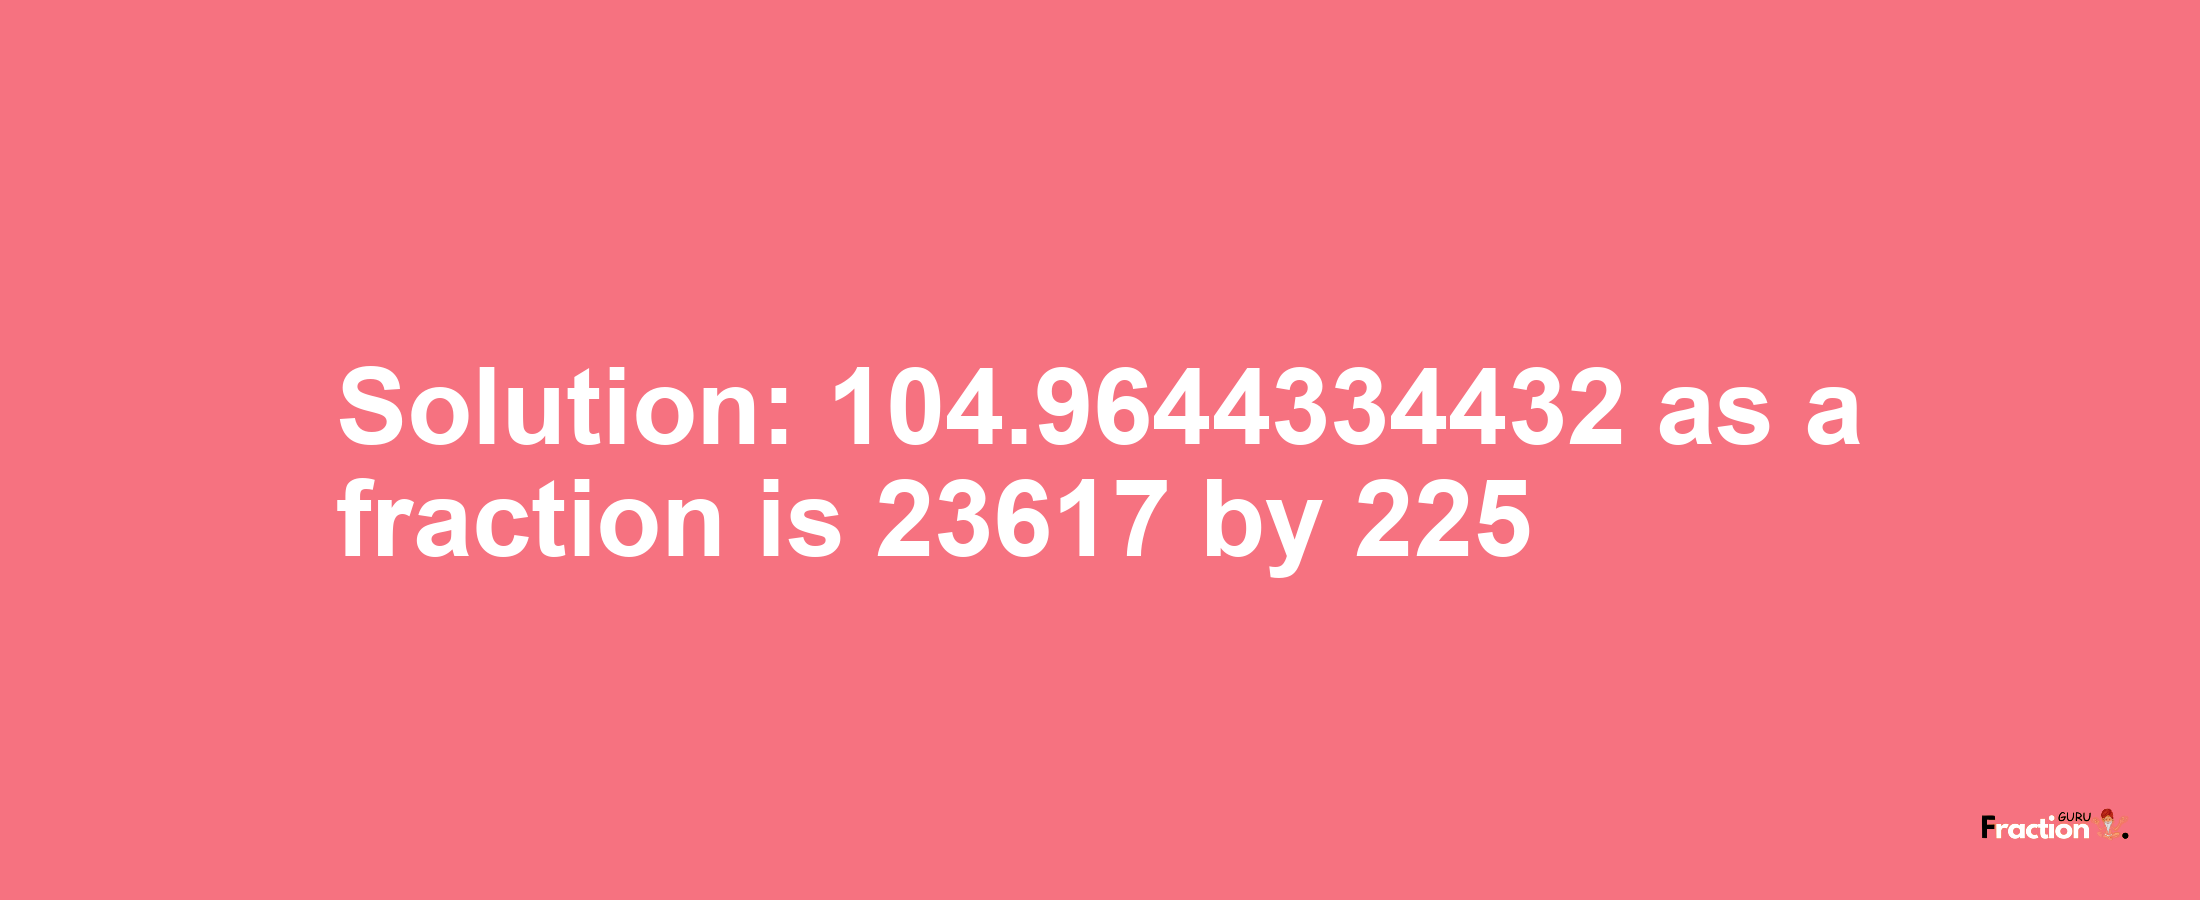 Solution:104.9644334432 as a fraction is 23617/225